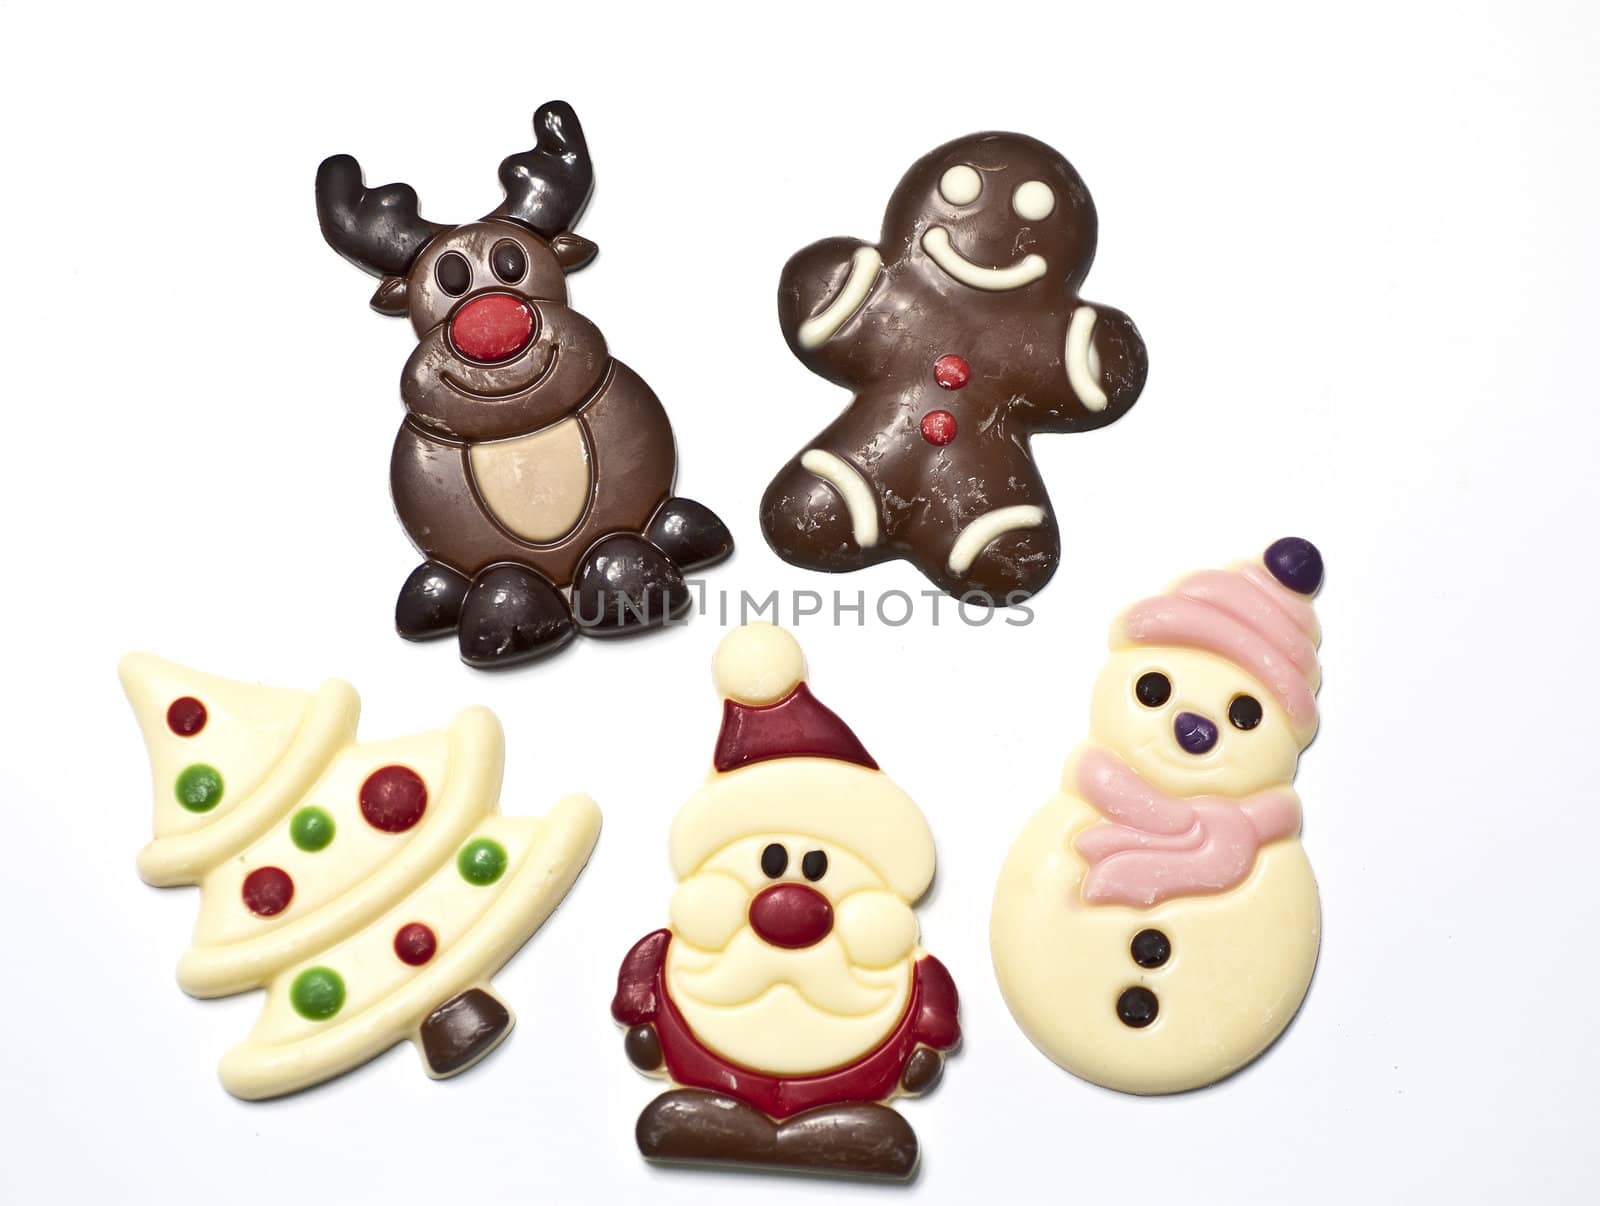 Five different Christmas figures made in chocolat